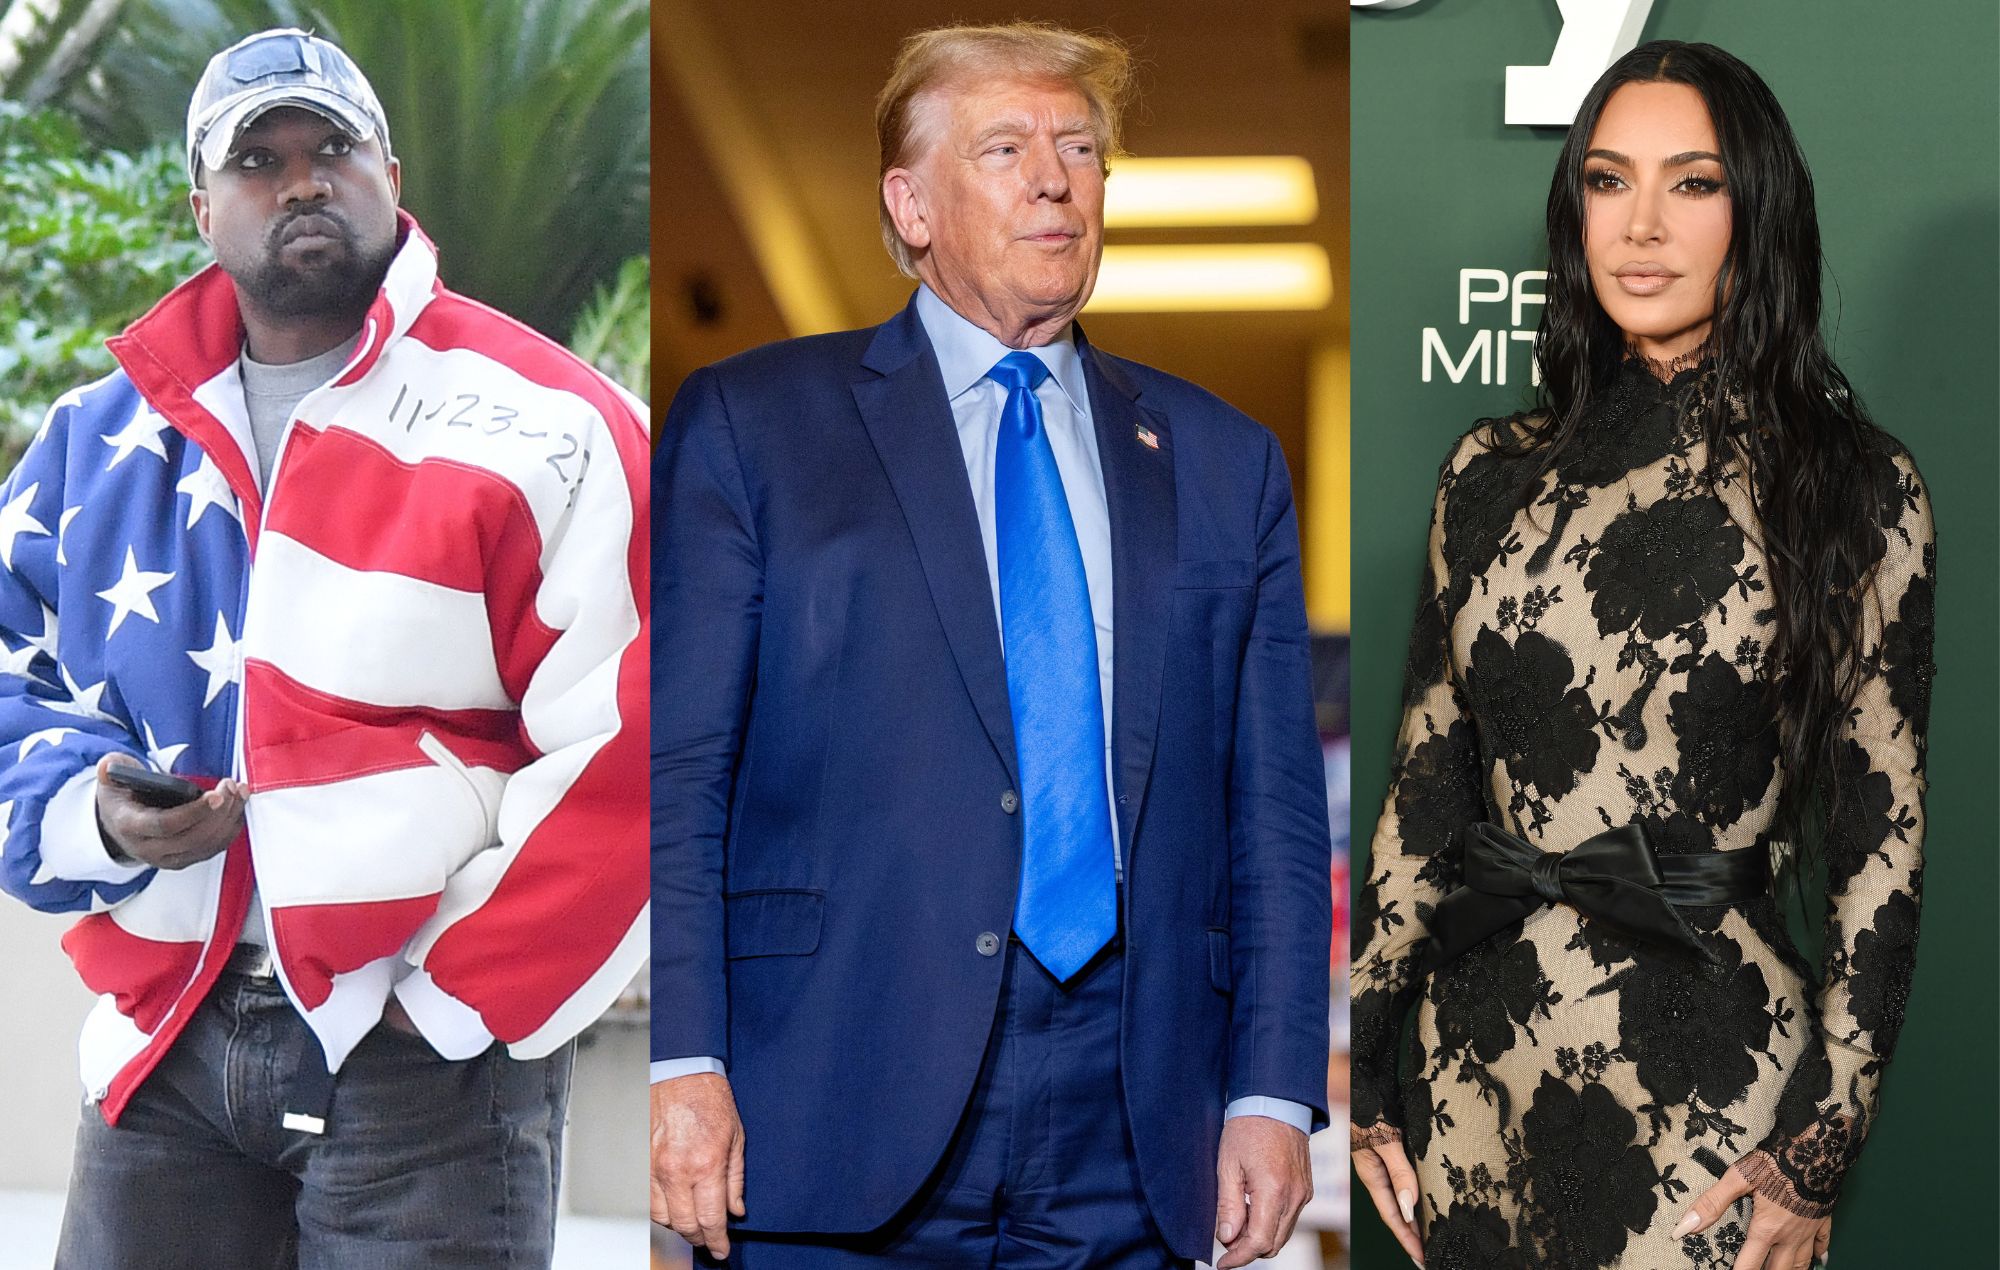 Donald Trump hits out at “world’s most overrated celebrity” Kim Kardashian while touting Kanye West